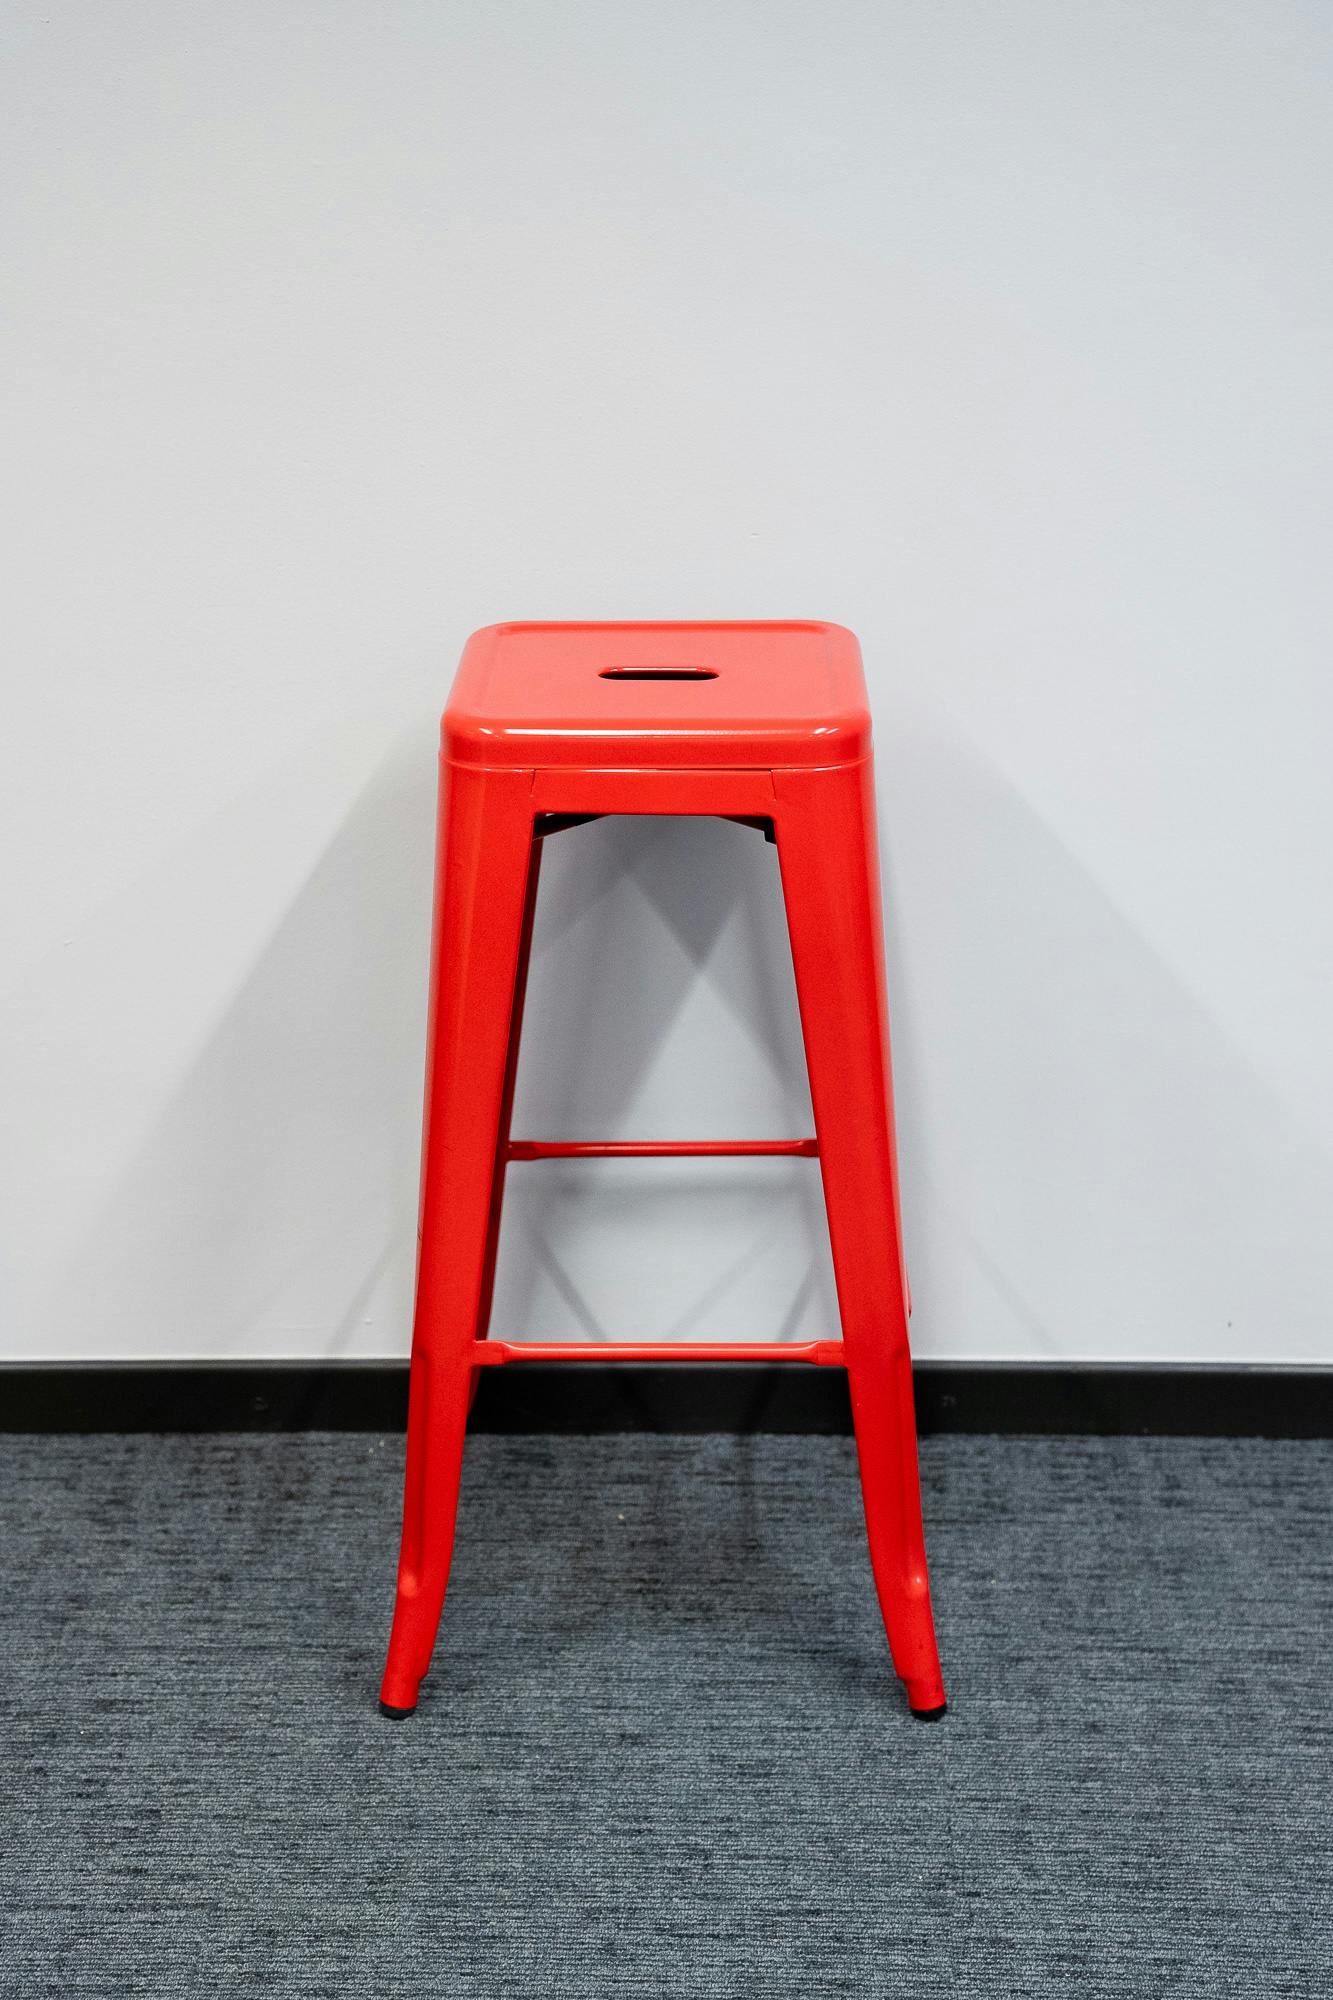 Red steel stool - Second hand quality "Chairs" - Relieve Furniture